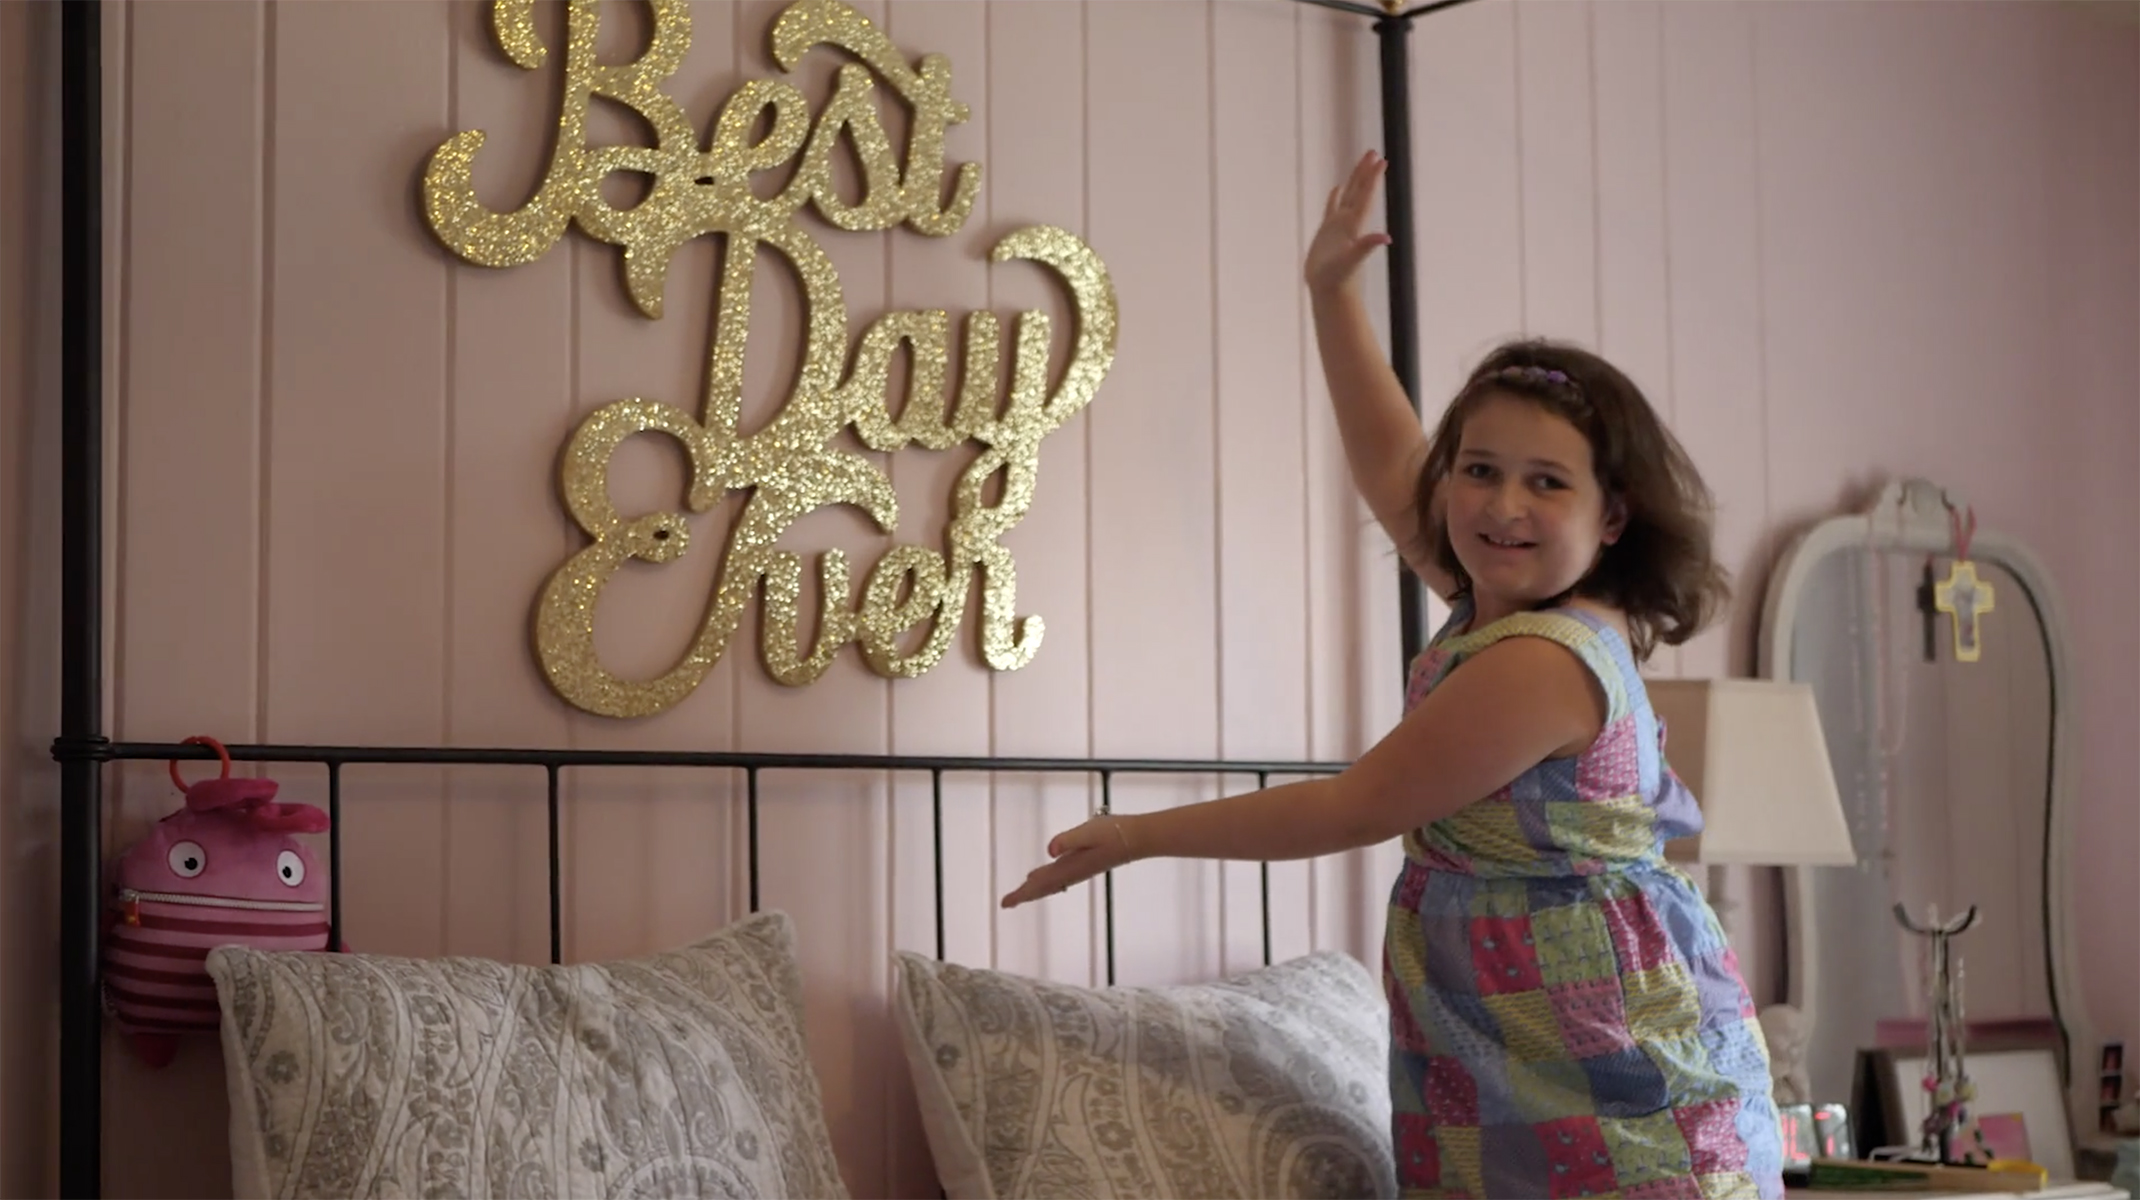 Young girl shows off her "Best Day Ever" sign in her room